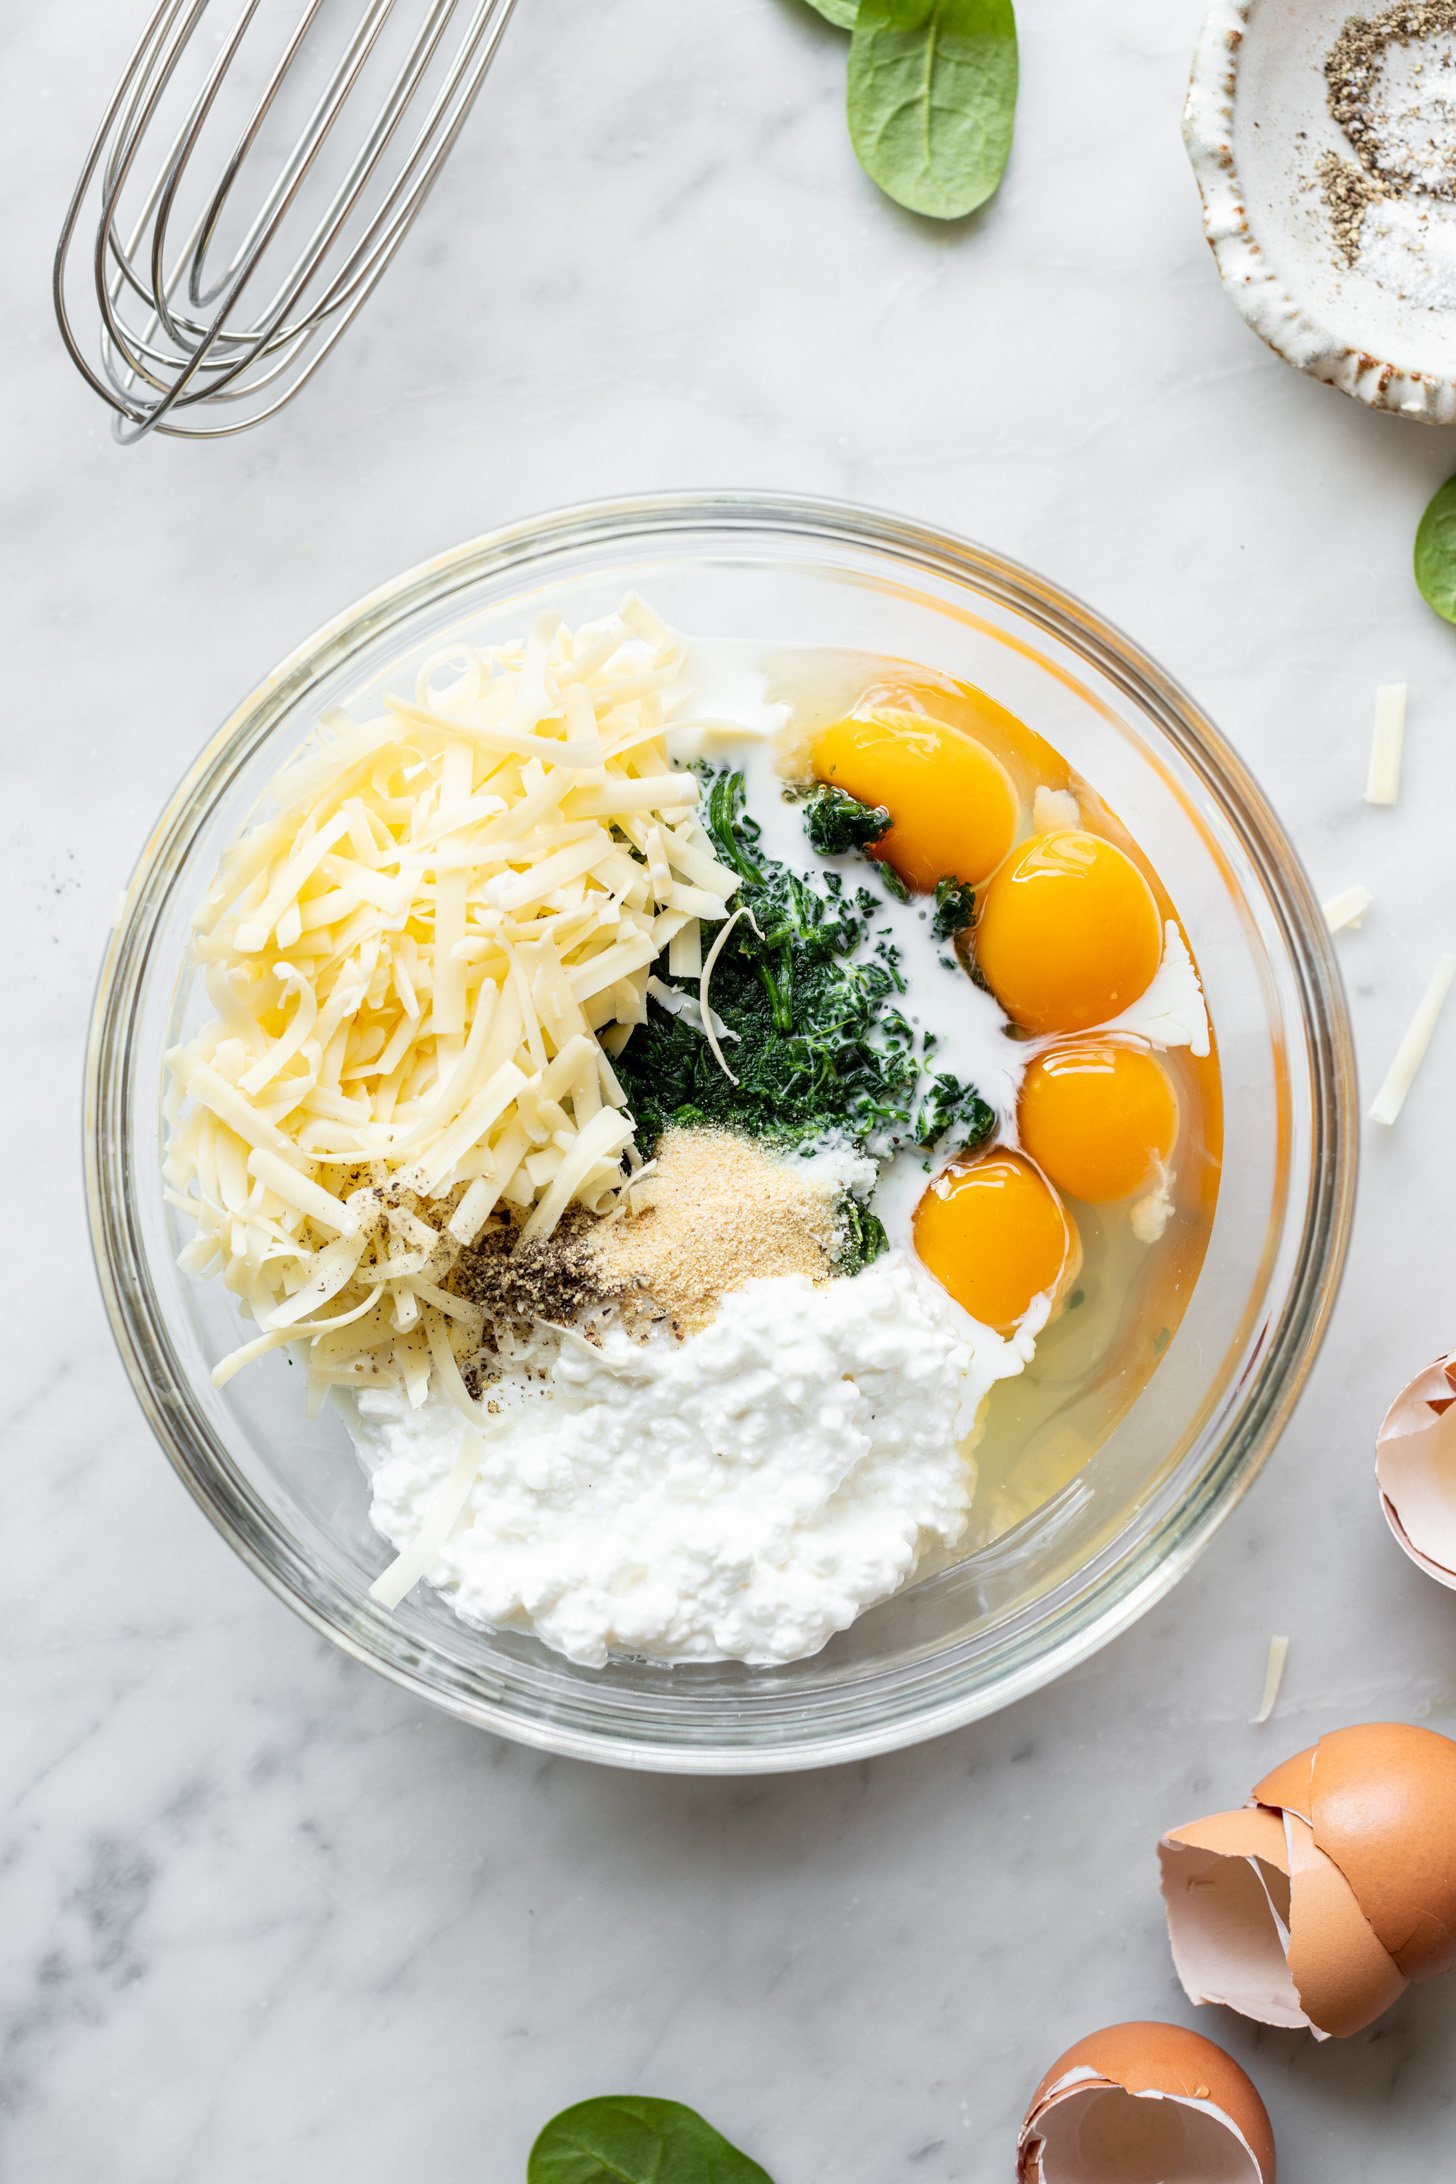 Eggs, spinach, cottage cheese, milk, salt, garlic powder, pepper, and cheddar cheese in a glass bowl sitting on a white marble surface. Strewn about counter are broken eggshells, a few baby spinach leaves, a few cheese shreds, a small bowl with salt and pepper and a whisk.